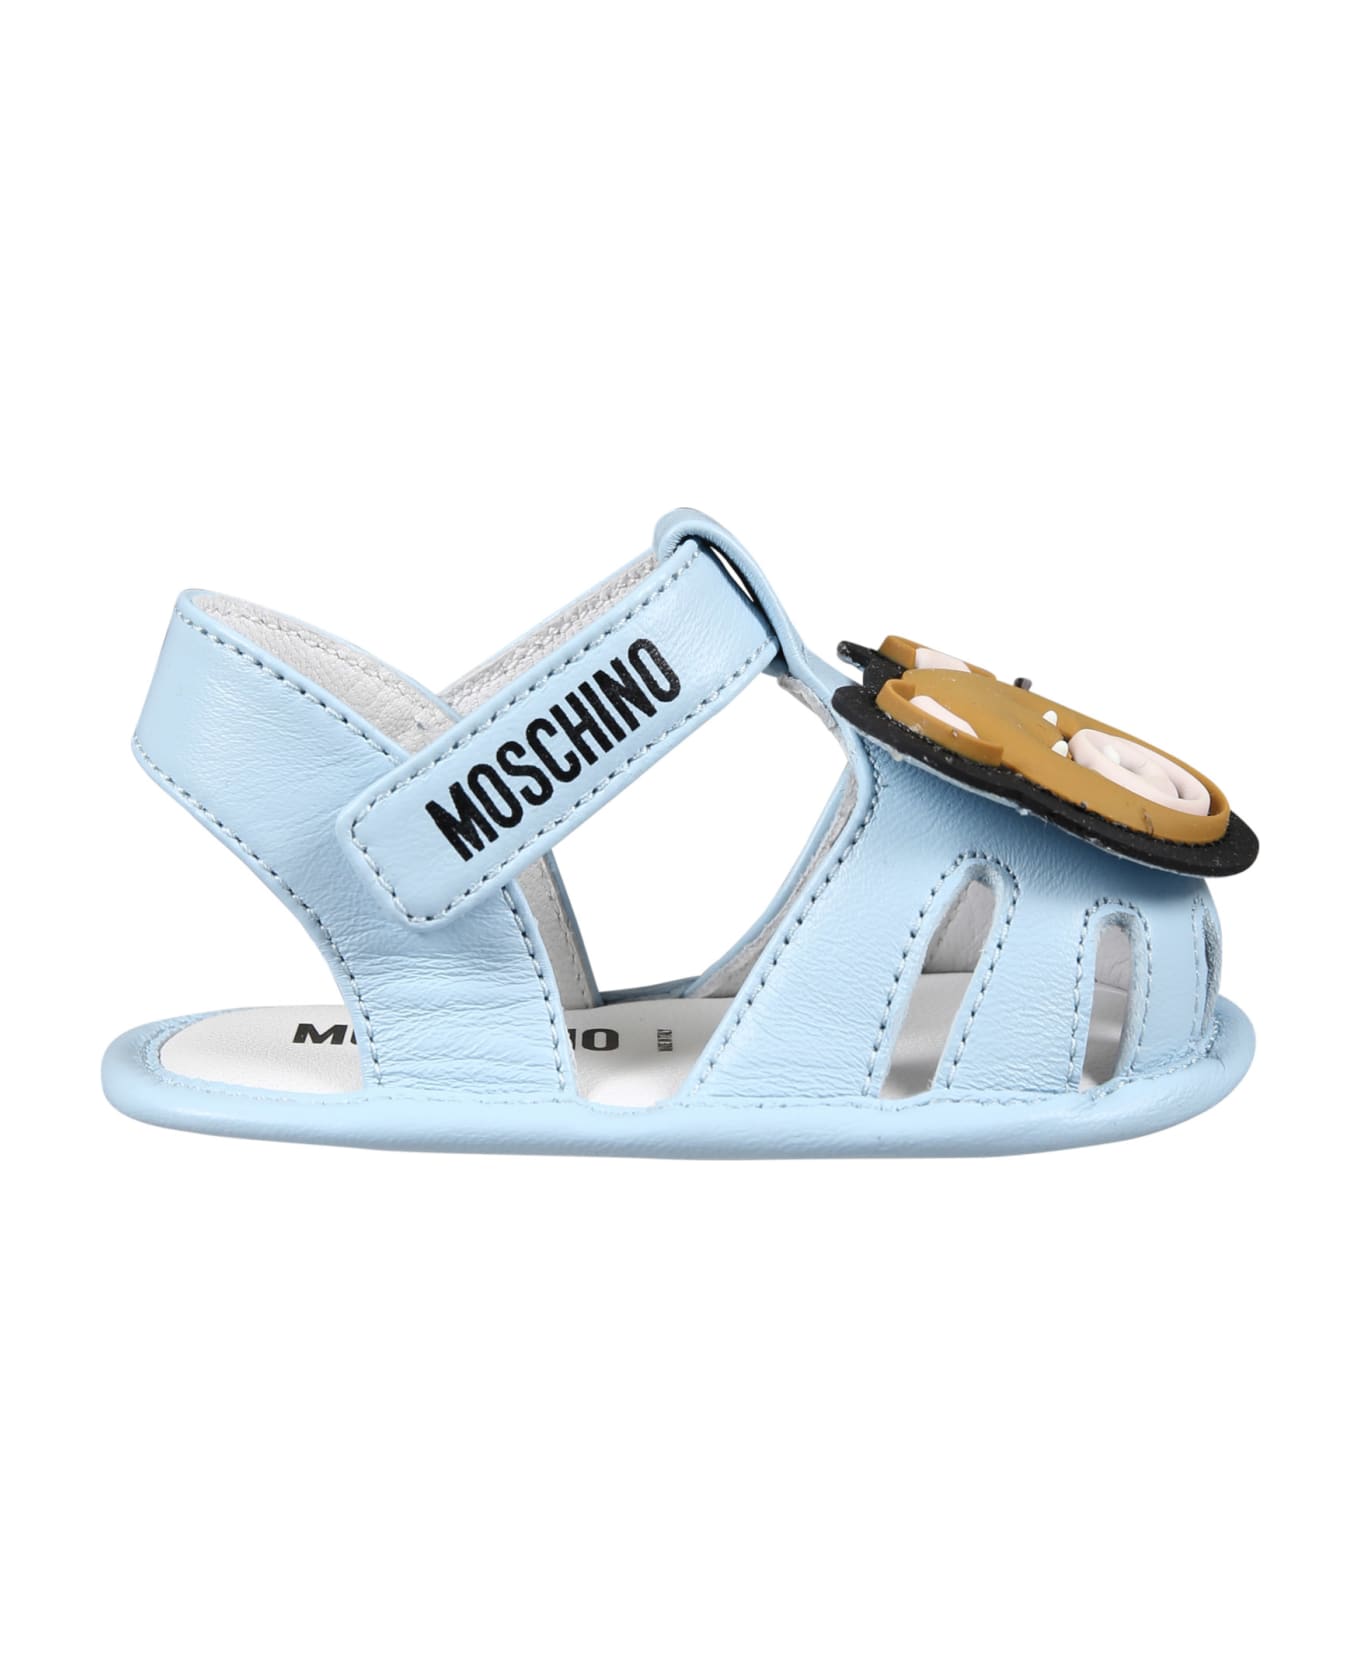 Moschino Light Blue Sandals For Baby Boy With Teddy Bear - Light Blue